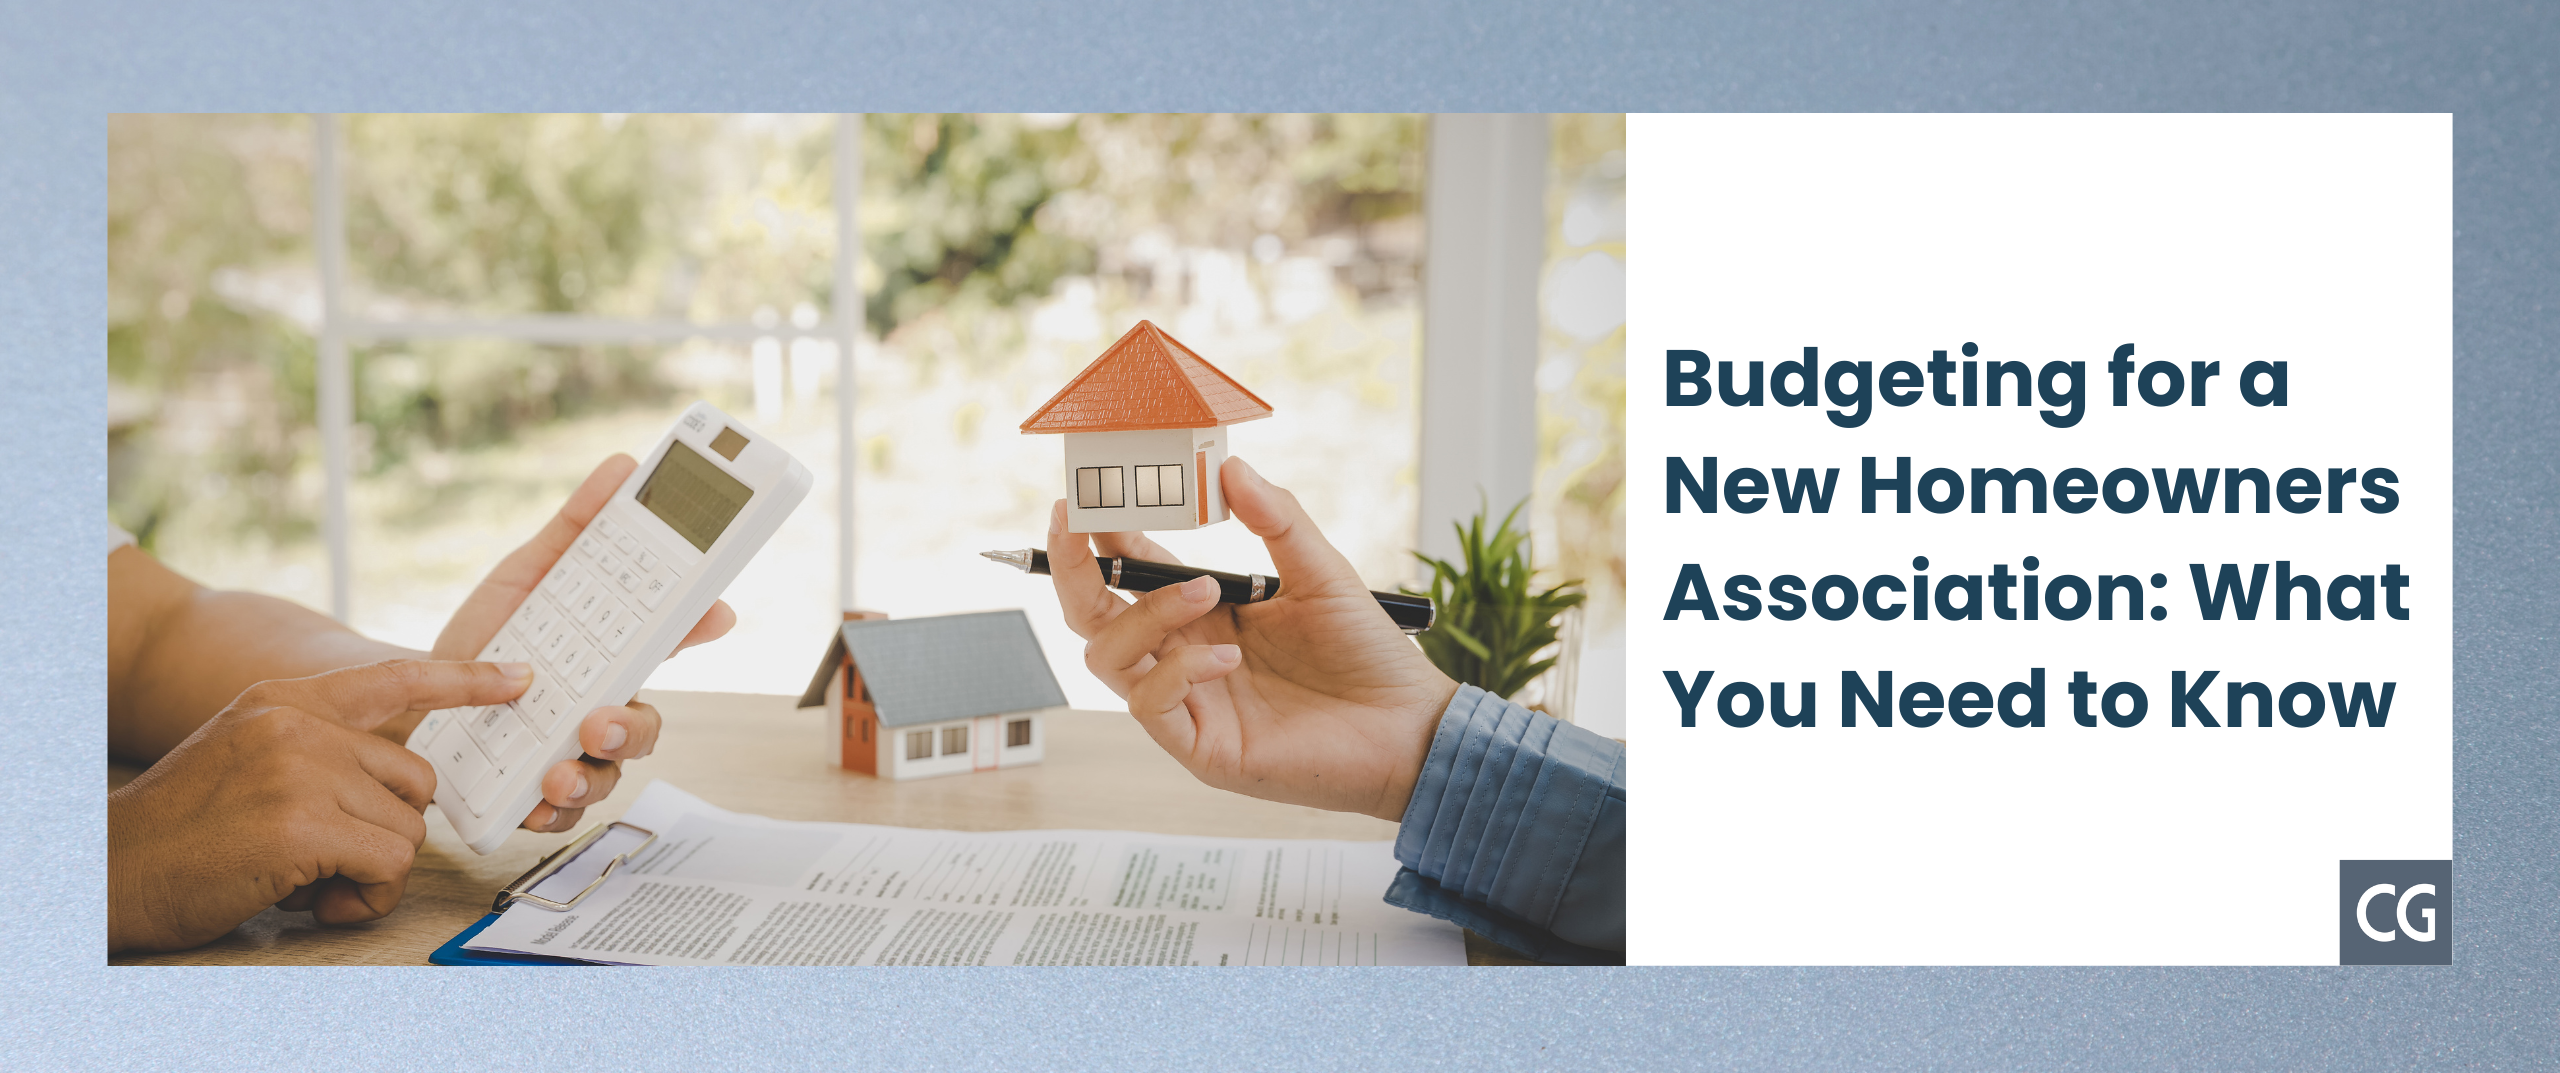 Budgeting for a New Homeowners Association: What You Need to Know